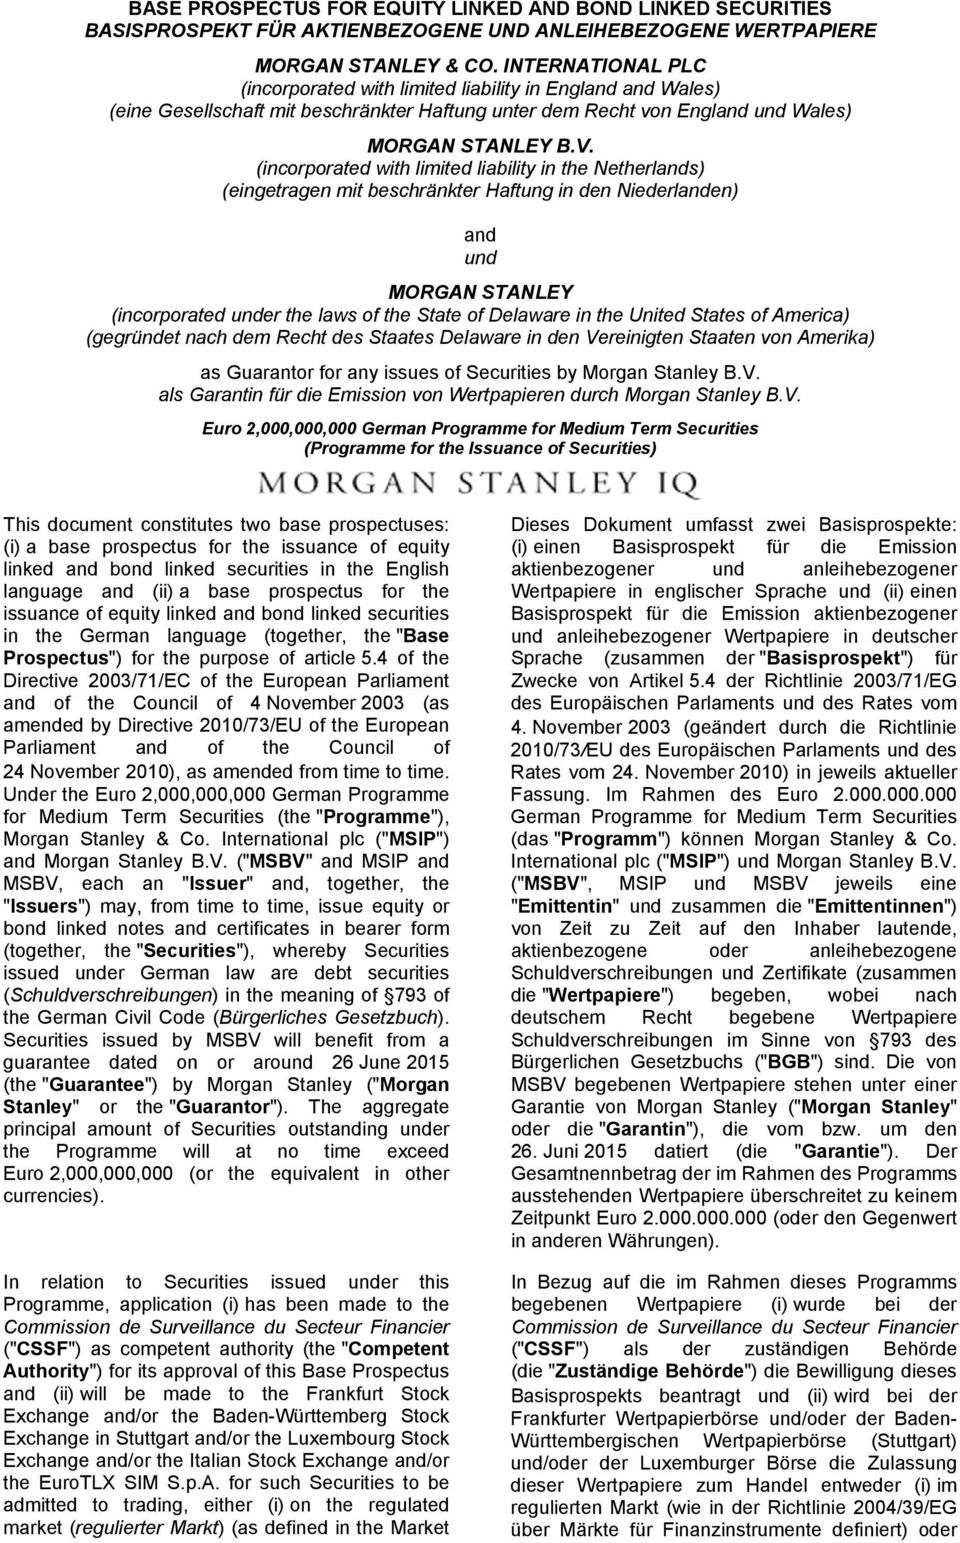 (incorporated with limited liability in the Netherlands) (eingetragen mit beschränkter Haftung in den Niederlanden) and und MORGAN STANLEY (incorporated under the laws of the State of Delaware in the